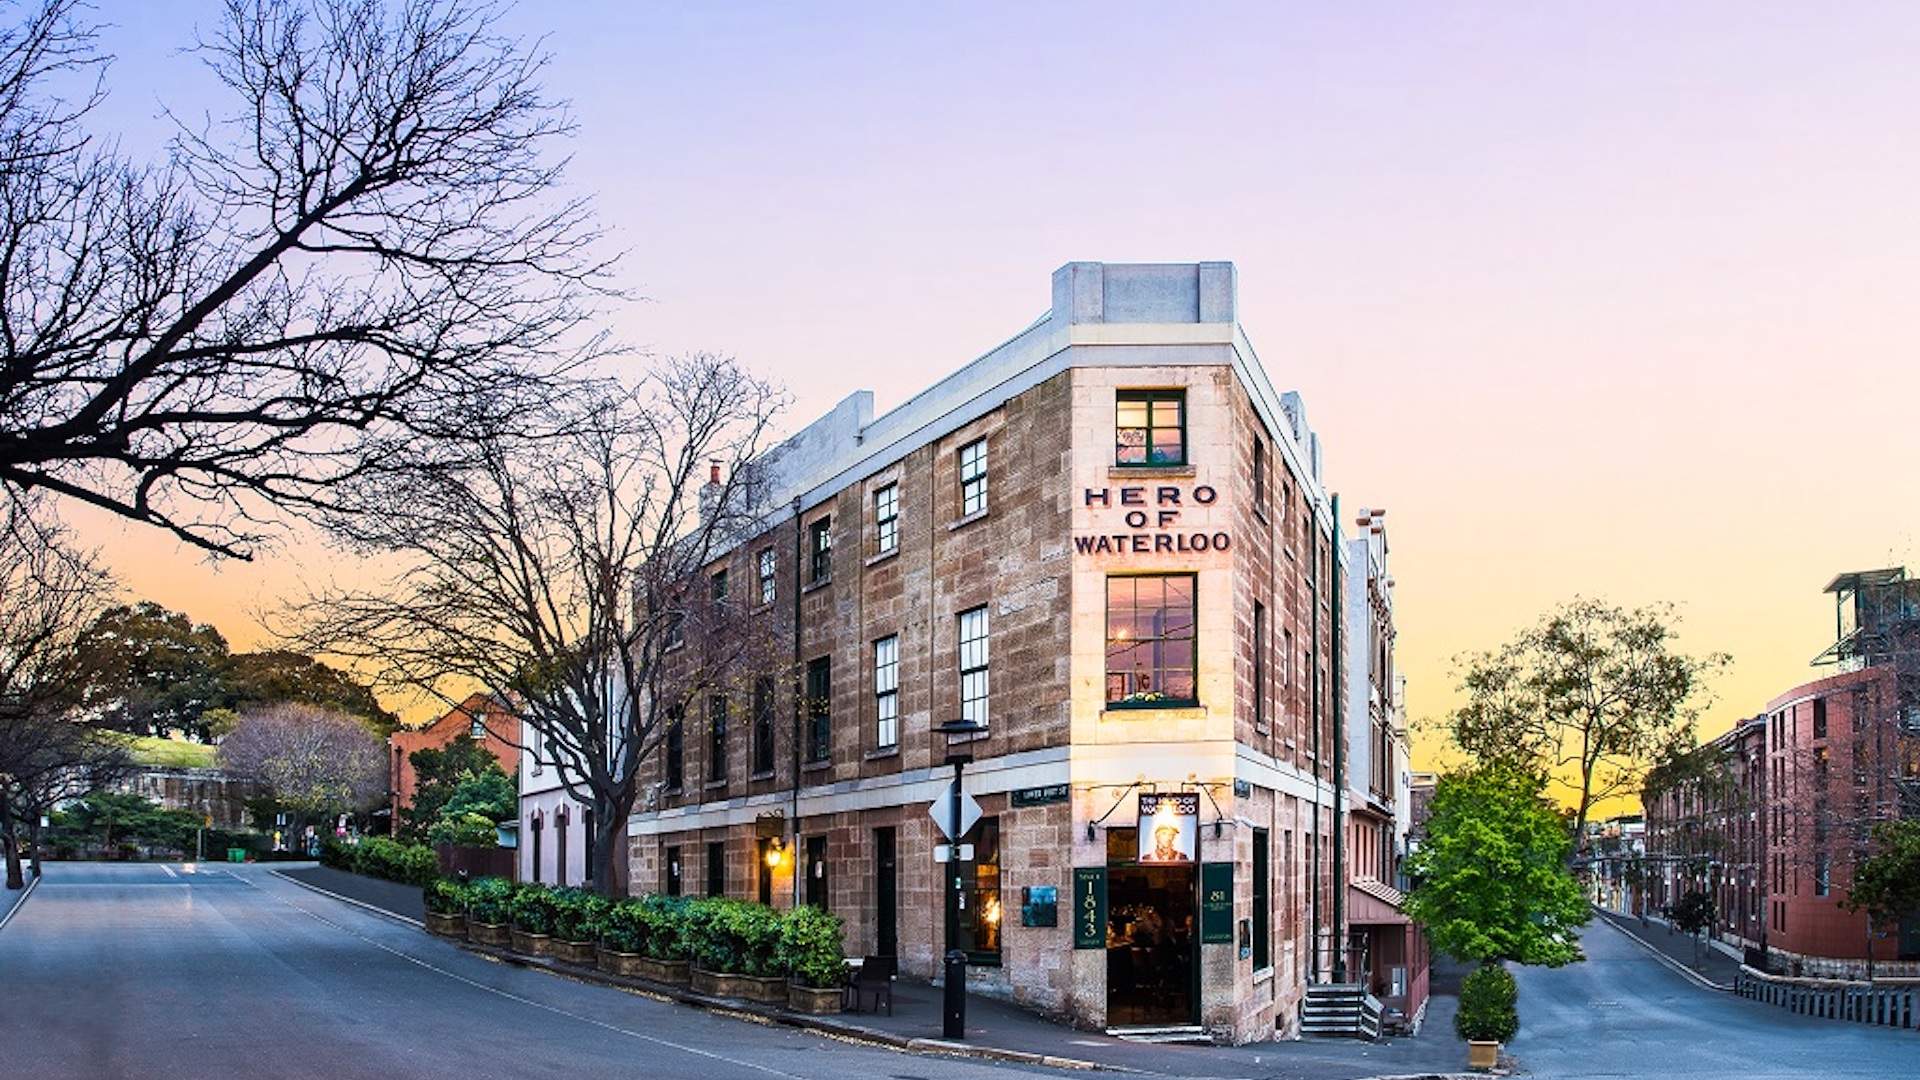 An Ode to the Old: Ten Long-Standing and Historical Sydney Pubs to Add to Your Must-Drink List